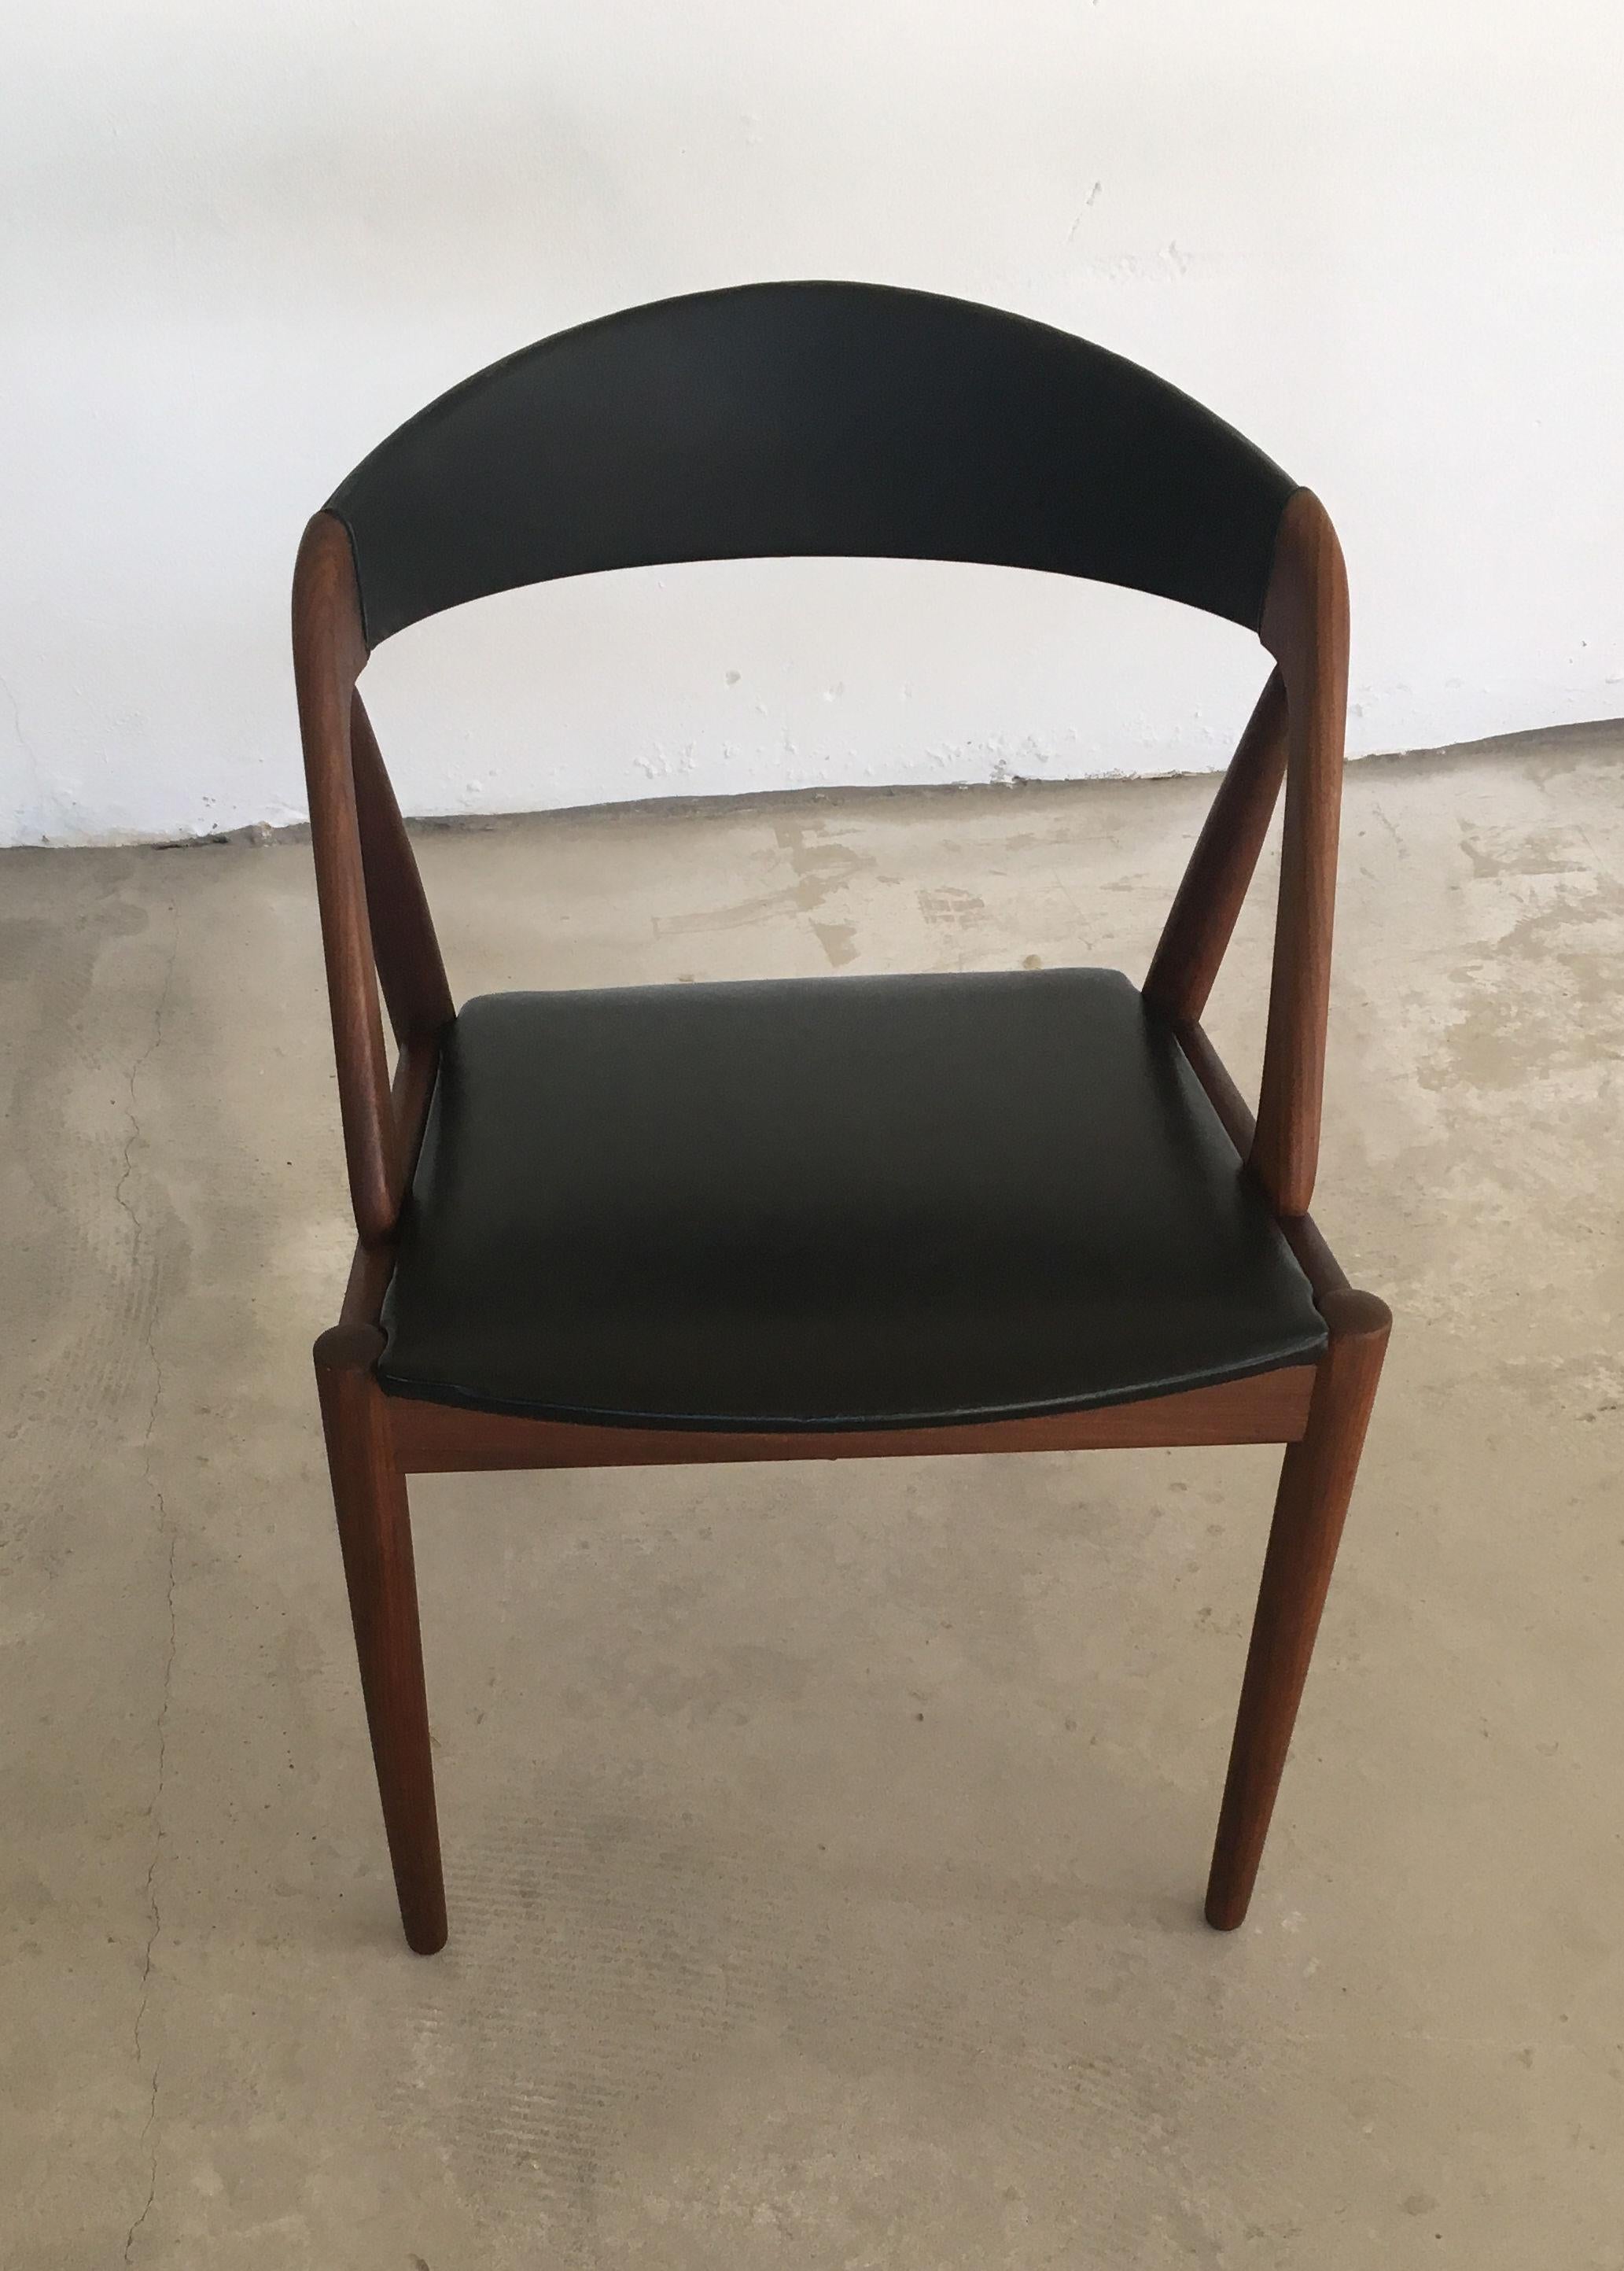 Kai Kristiansens model 31 dining chairs with refinished frames and black leather upholstery.

The A-frame model 31 chairs were designed by Kai Kristiansen in 1956. The model with its curved, straight and oblique lines and comfortable seats are one